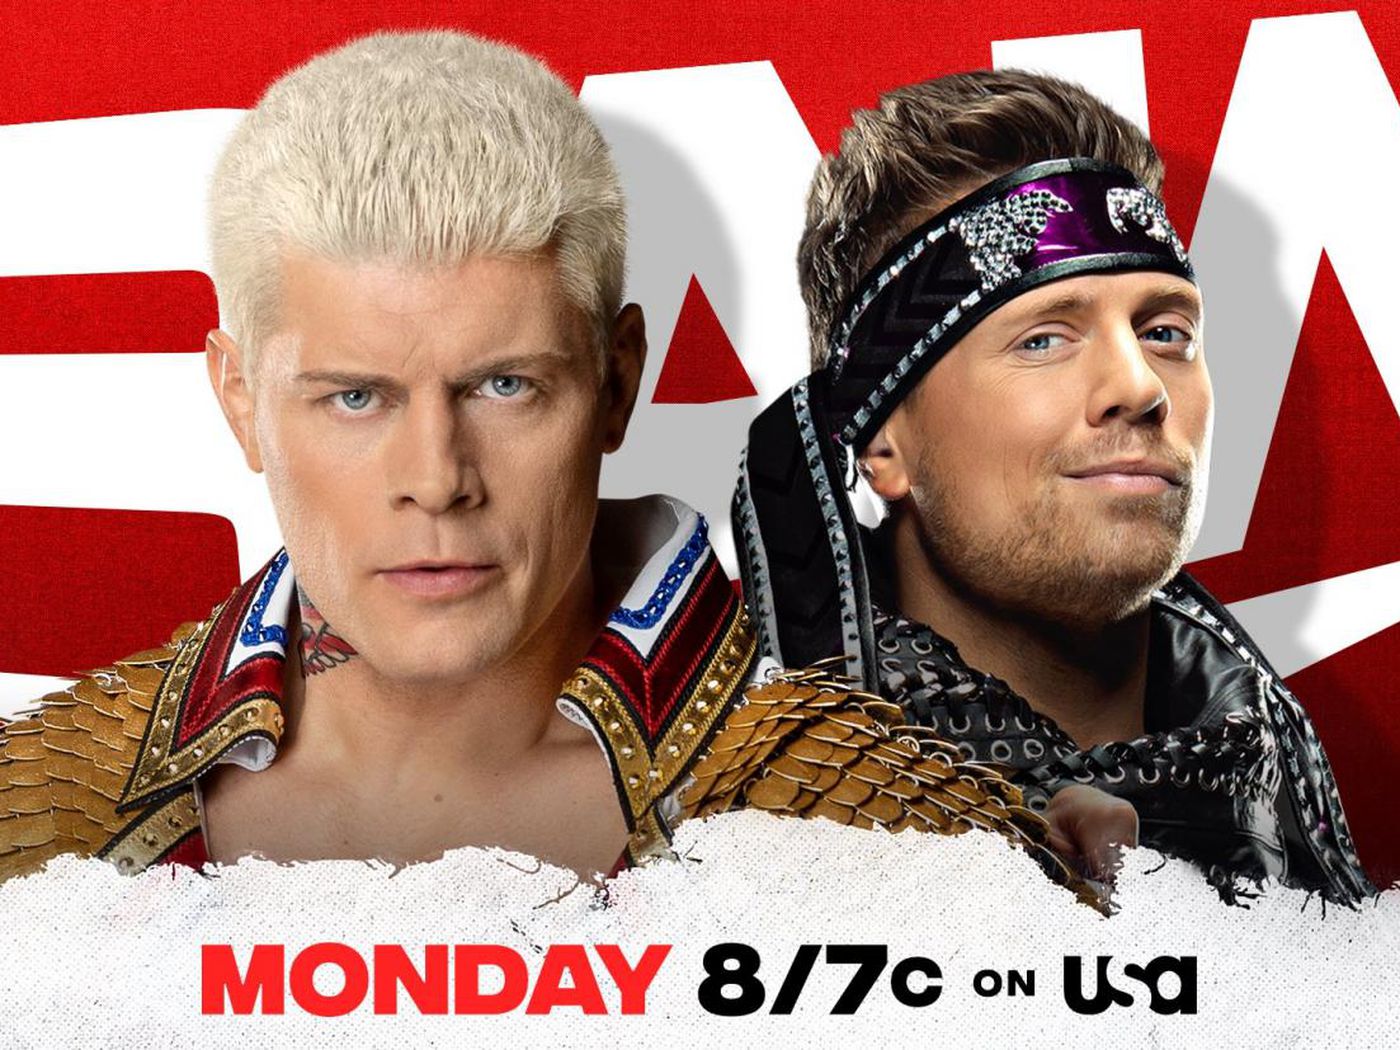 WWE Raw results, live blog (April 11, 2022): Cody Rhodes vs. The Miz - Cageside Seats